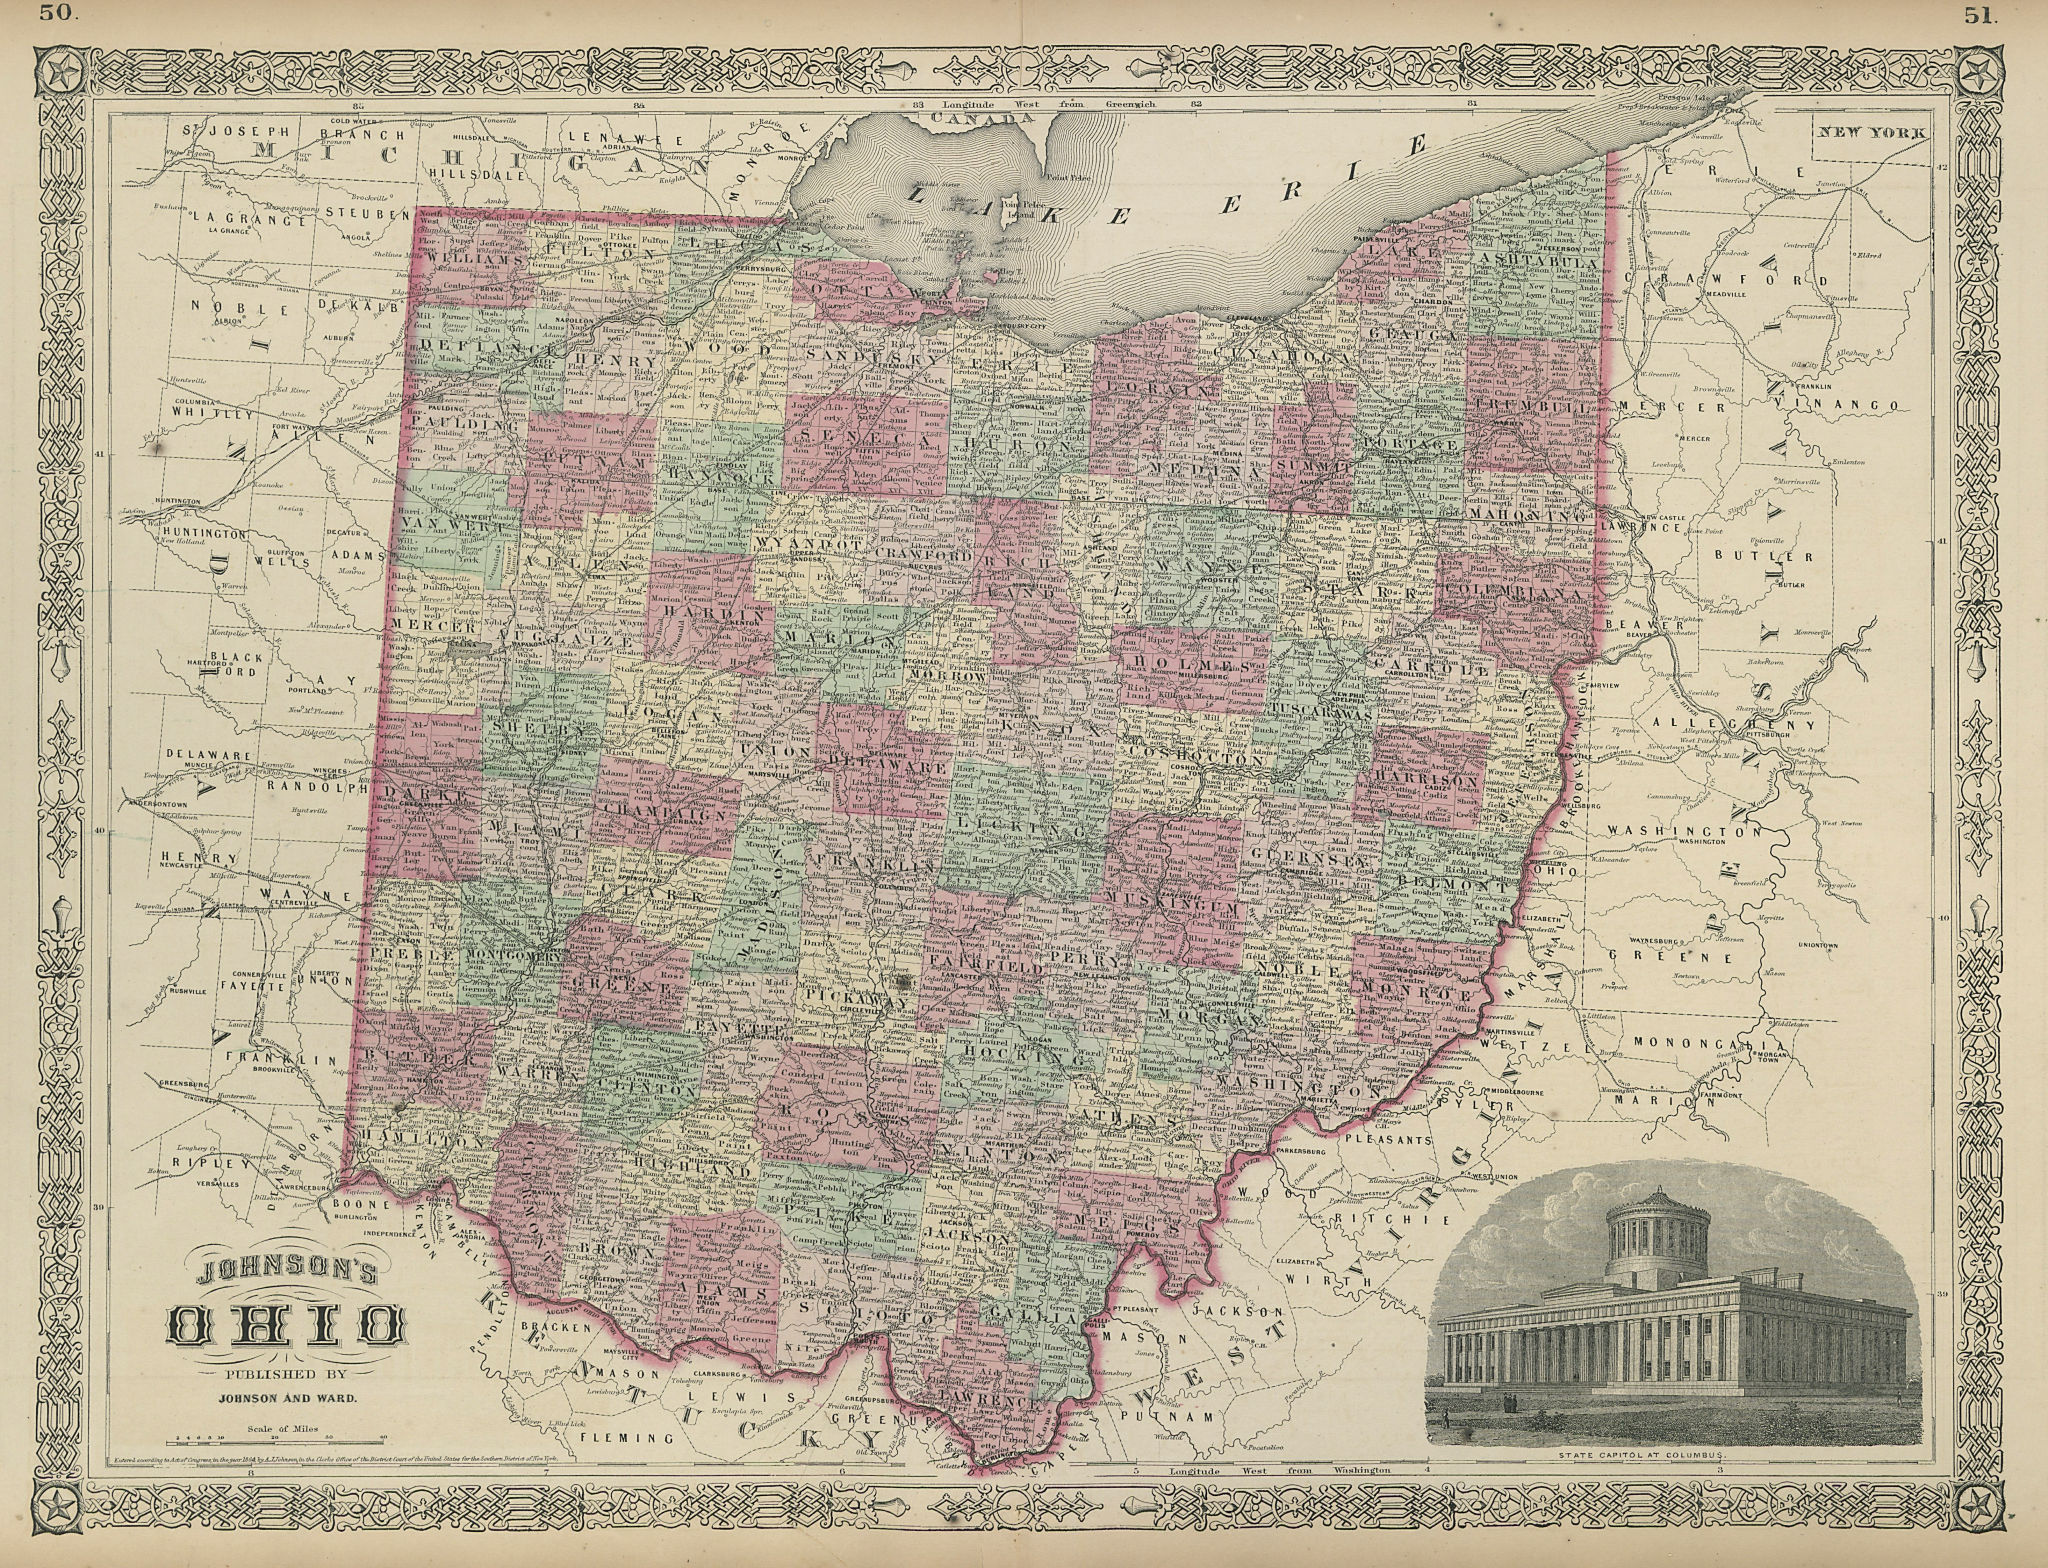 Associate Product Johnson's Ohio. US state map showing counties 1865 old antique plan chart